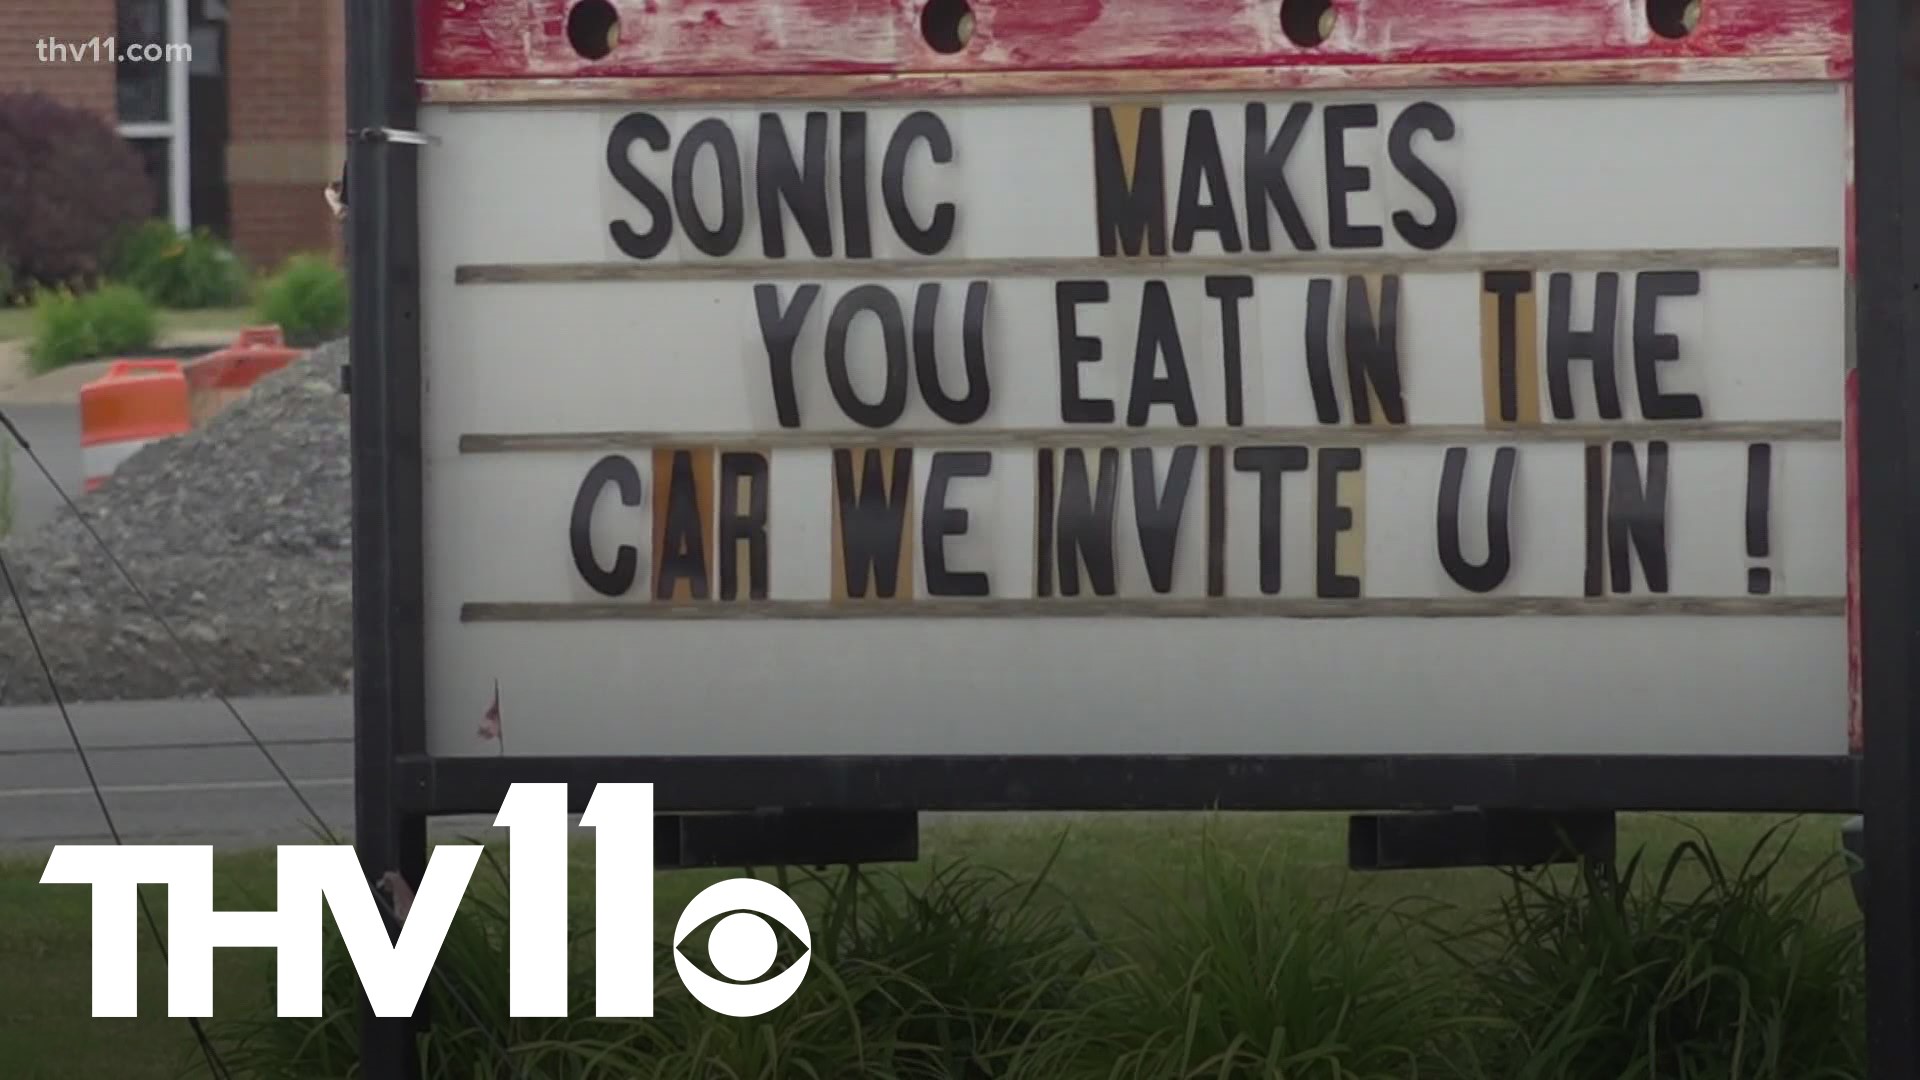 What started as a joke between neighboring businesses in Cabot is now going viral.